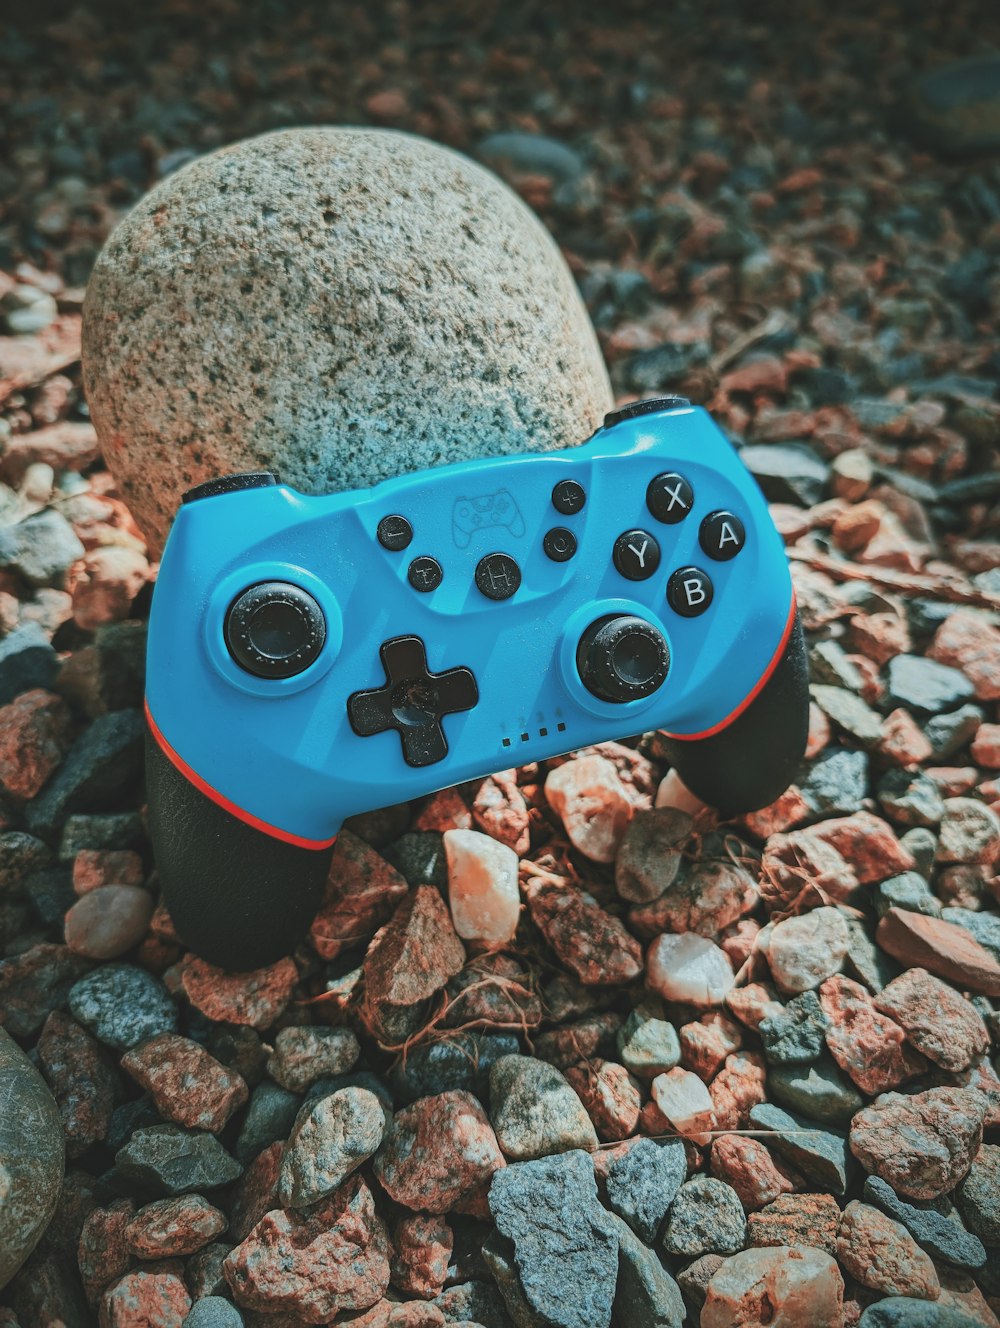 a blue controller sitting on top of a pile of rocks